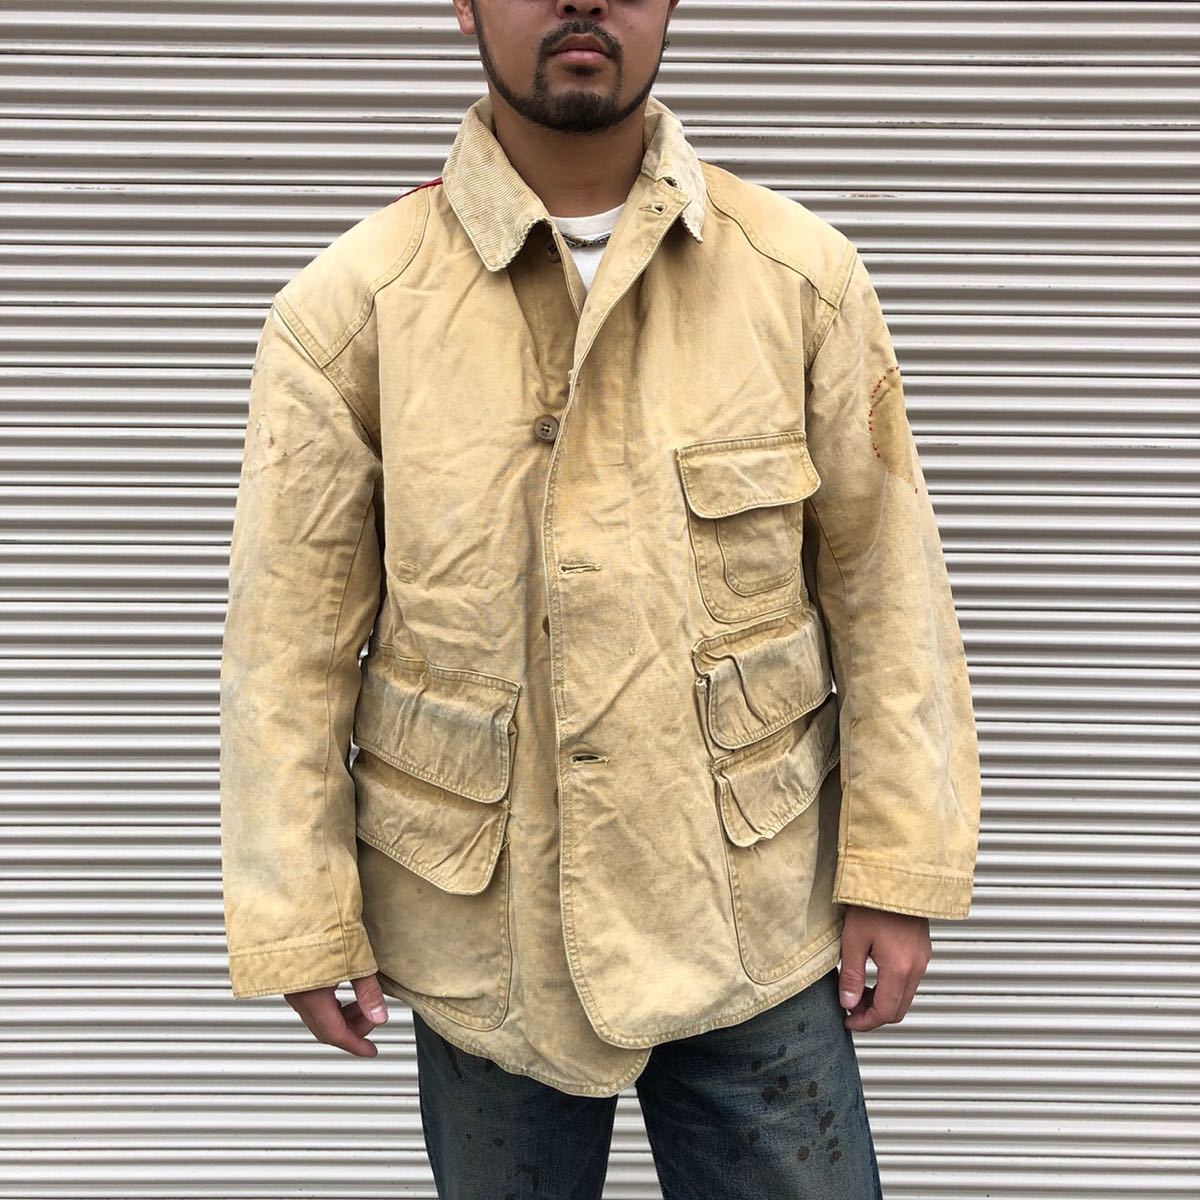 ★MOUNTAINRESEARCH×BAMBOOSHOOTS★ハンティングJKキャンプ